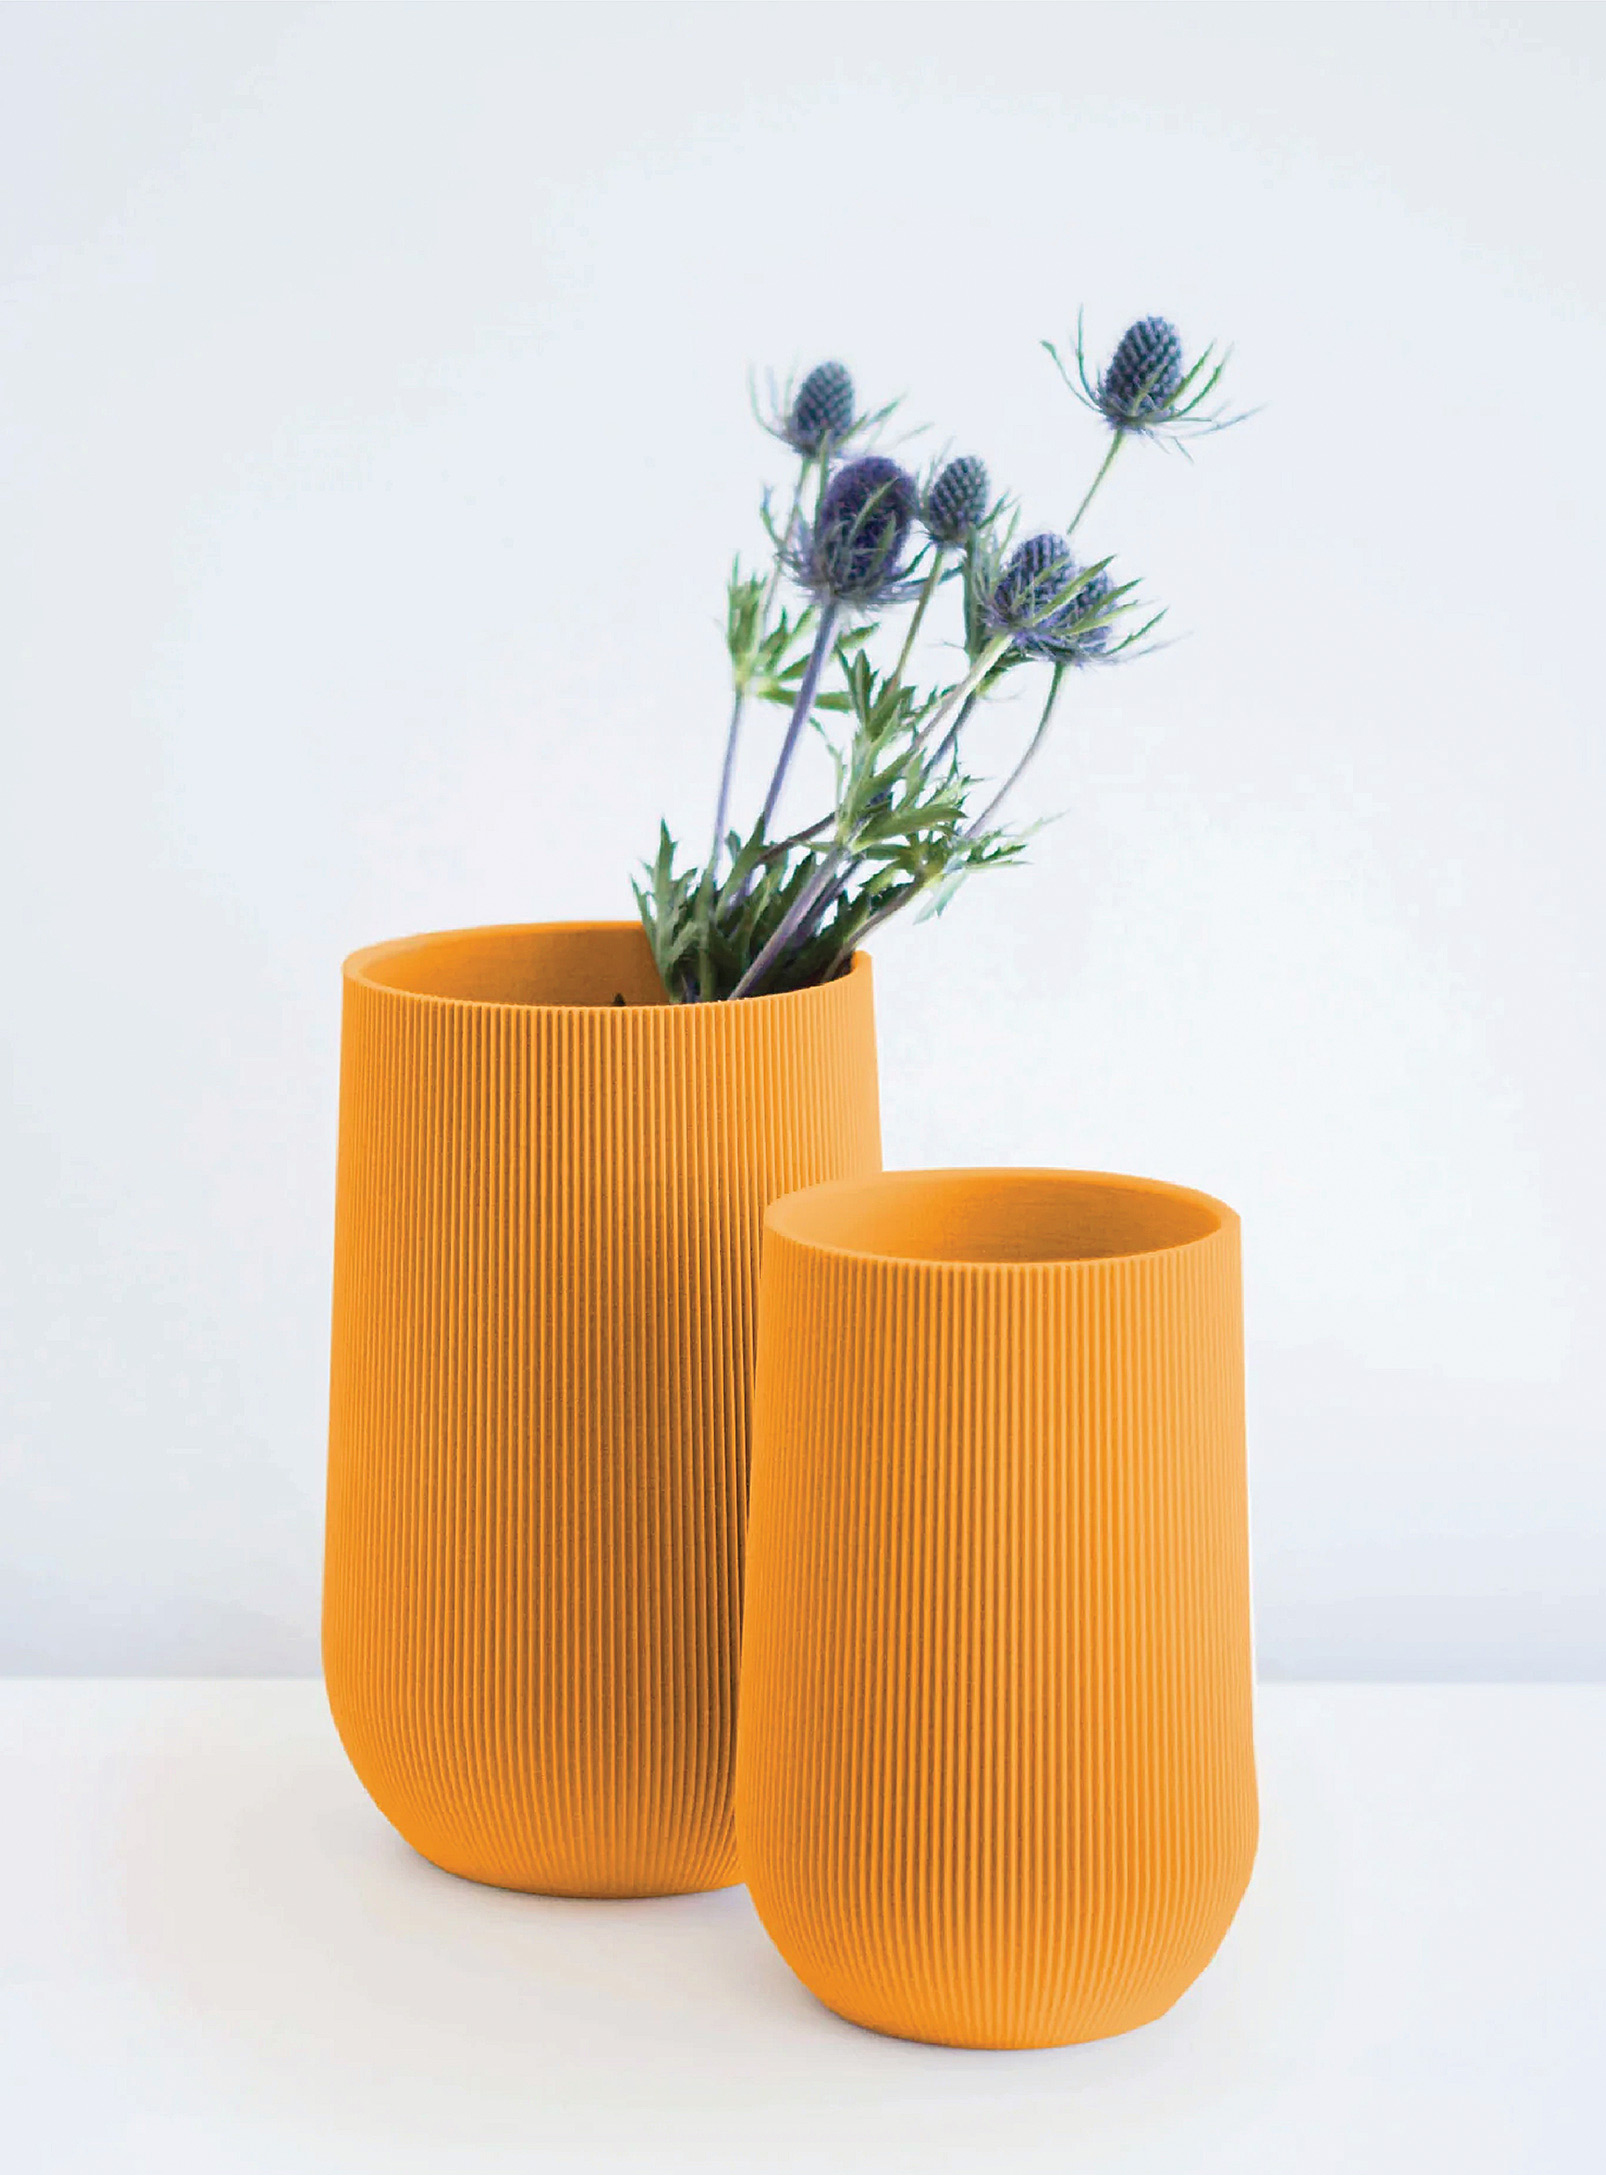 Conifer Homewares Sequoia Plant-based Vase See Available Sizes In Golden Yellow